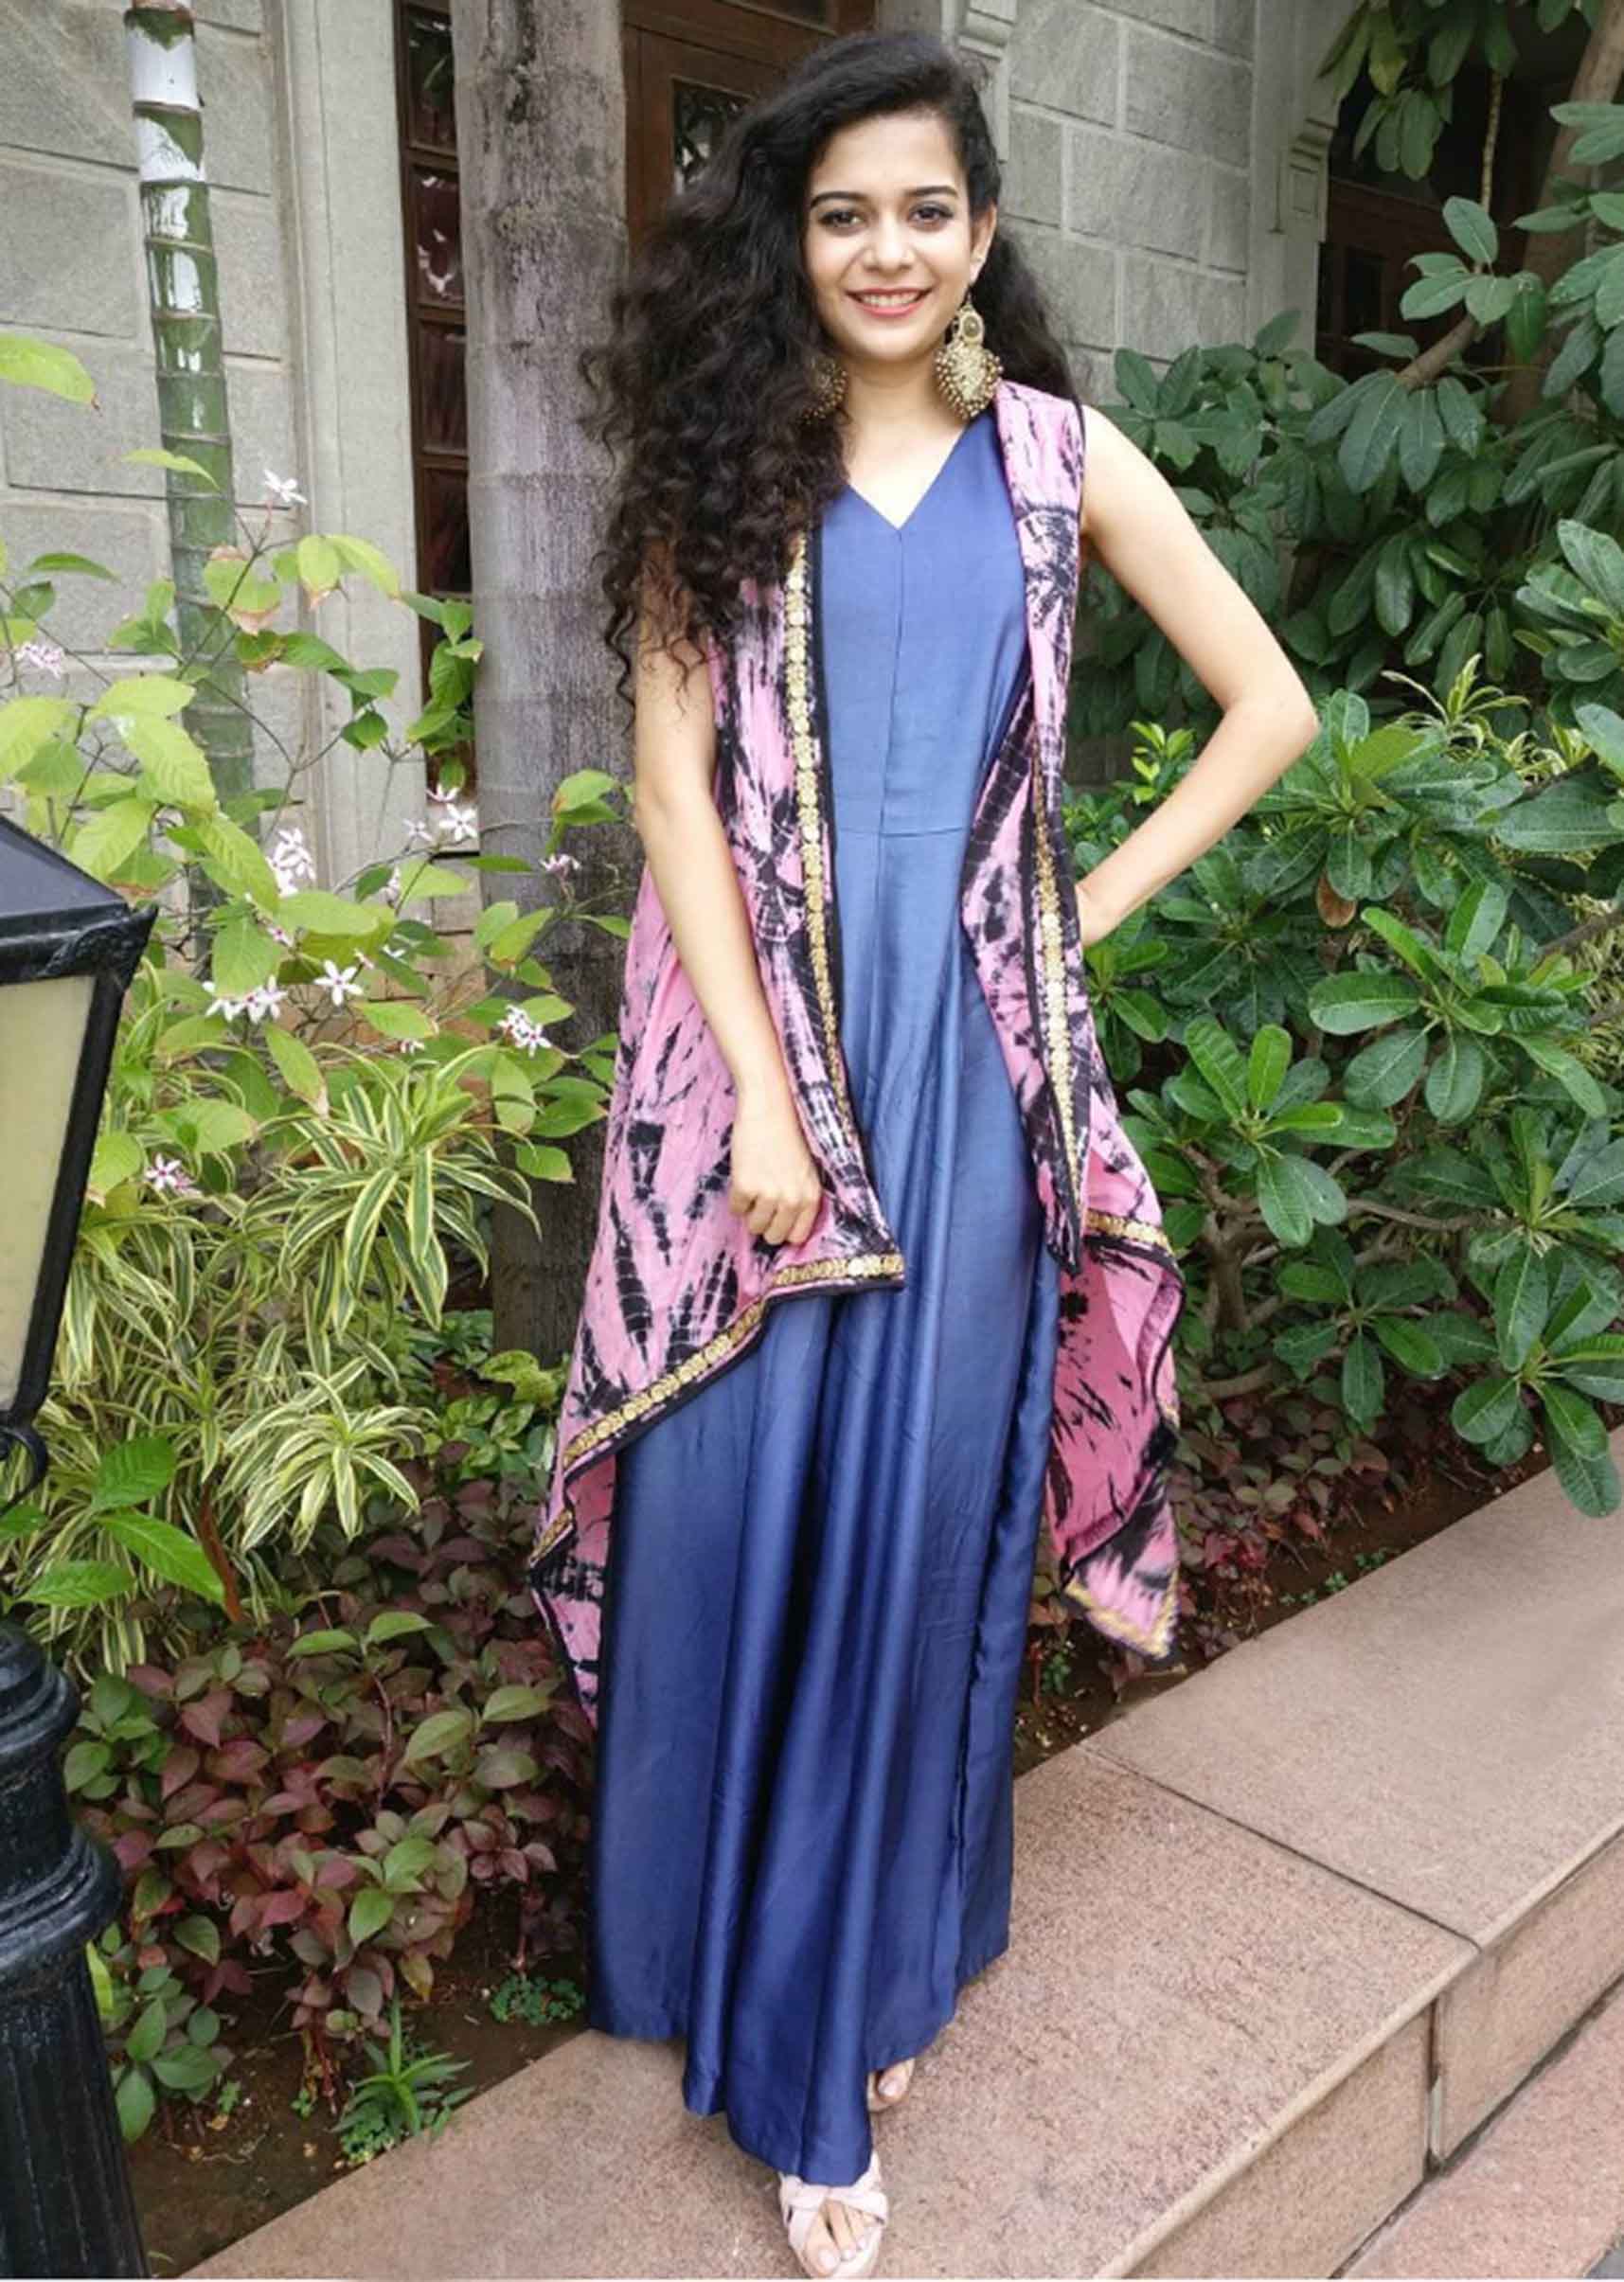 Outfits you wish you could steal from Mithila Palkar’s wardrobe